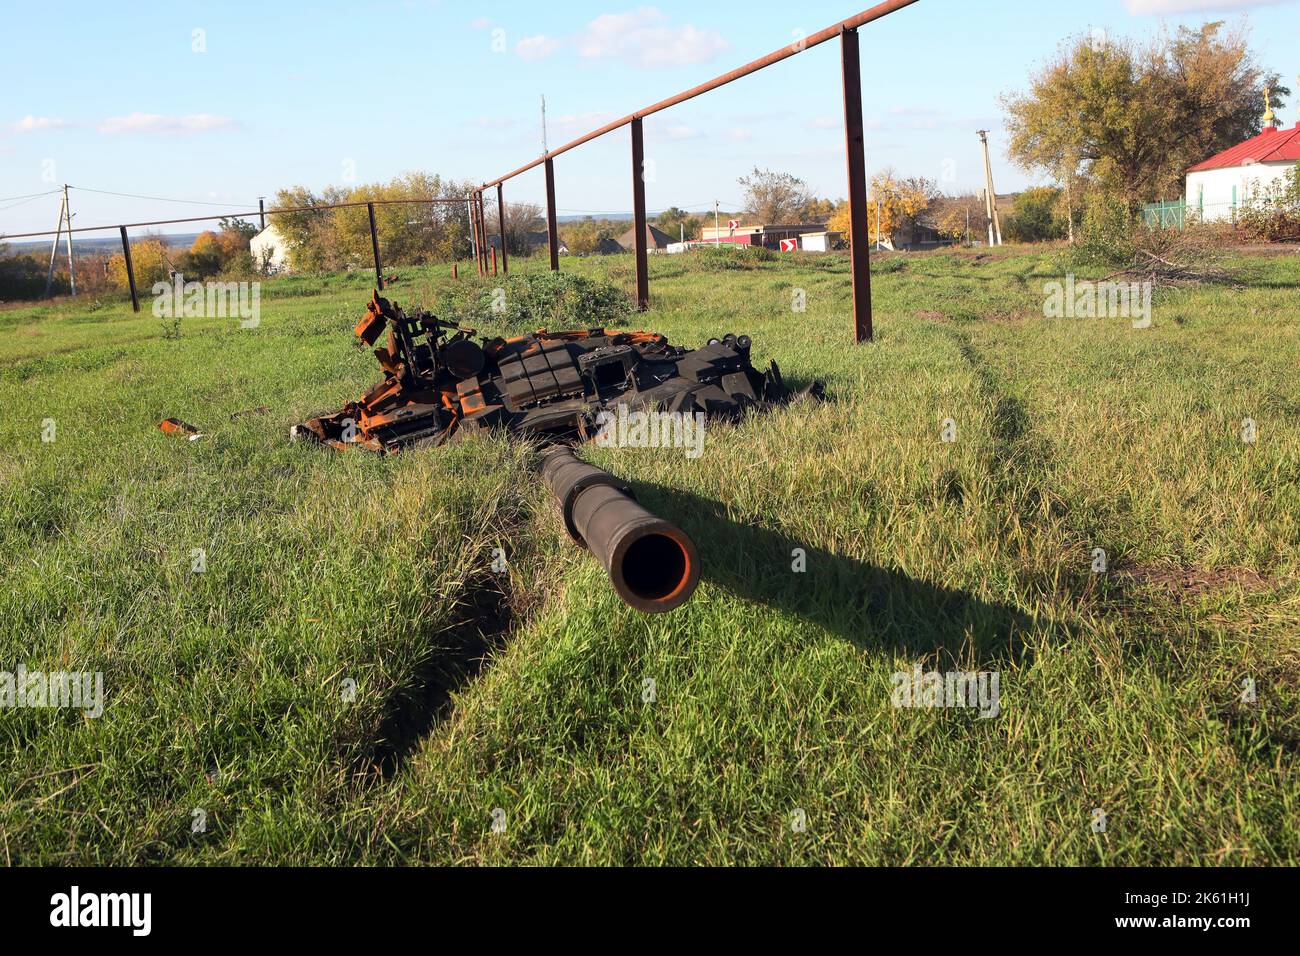 KHARKIV REGION, UKRAINE - OCTOBER 11, 2022 - Blown off turret of a destroyed russian tank is seen in the village of Pisky-Radkivski liberated from the russian occupiers , Kharkiv Region, northeastern Ukraine. Credit: Ukrinform/Alamy Live News Stock Photo